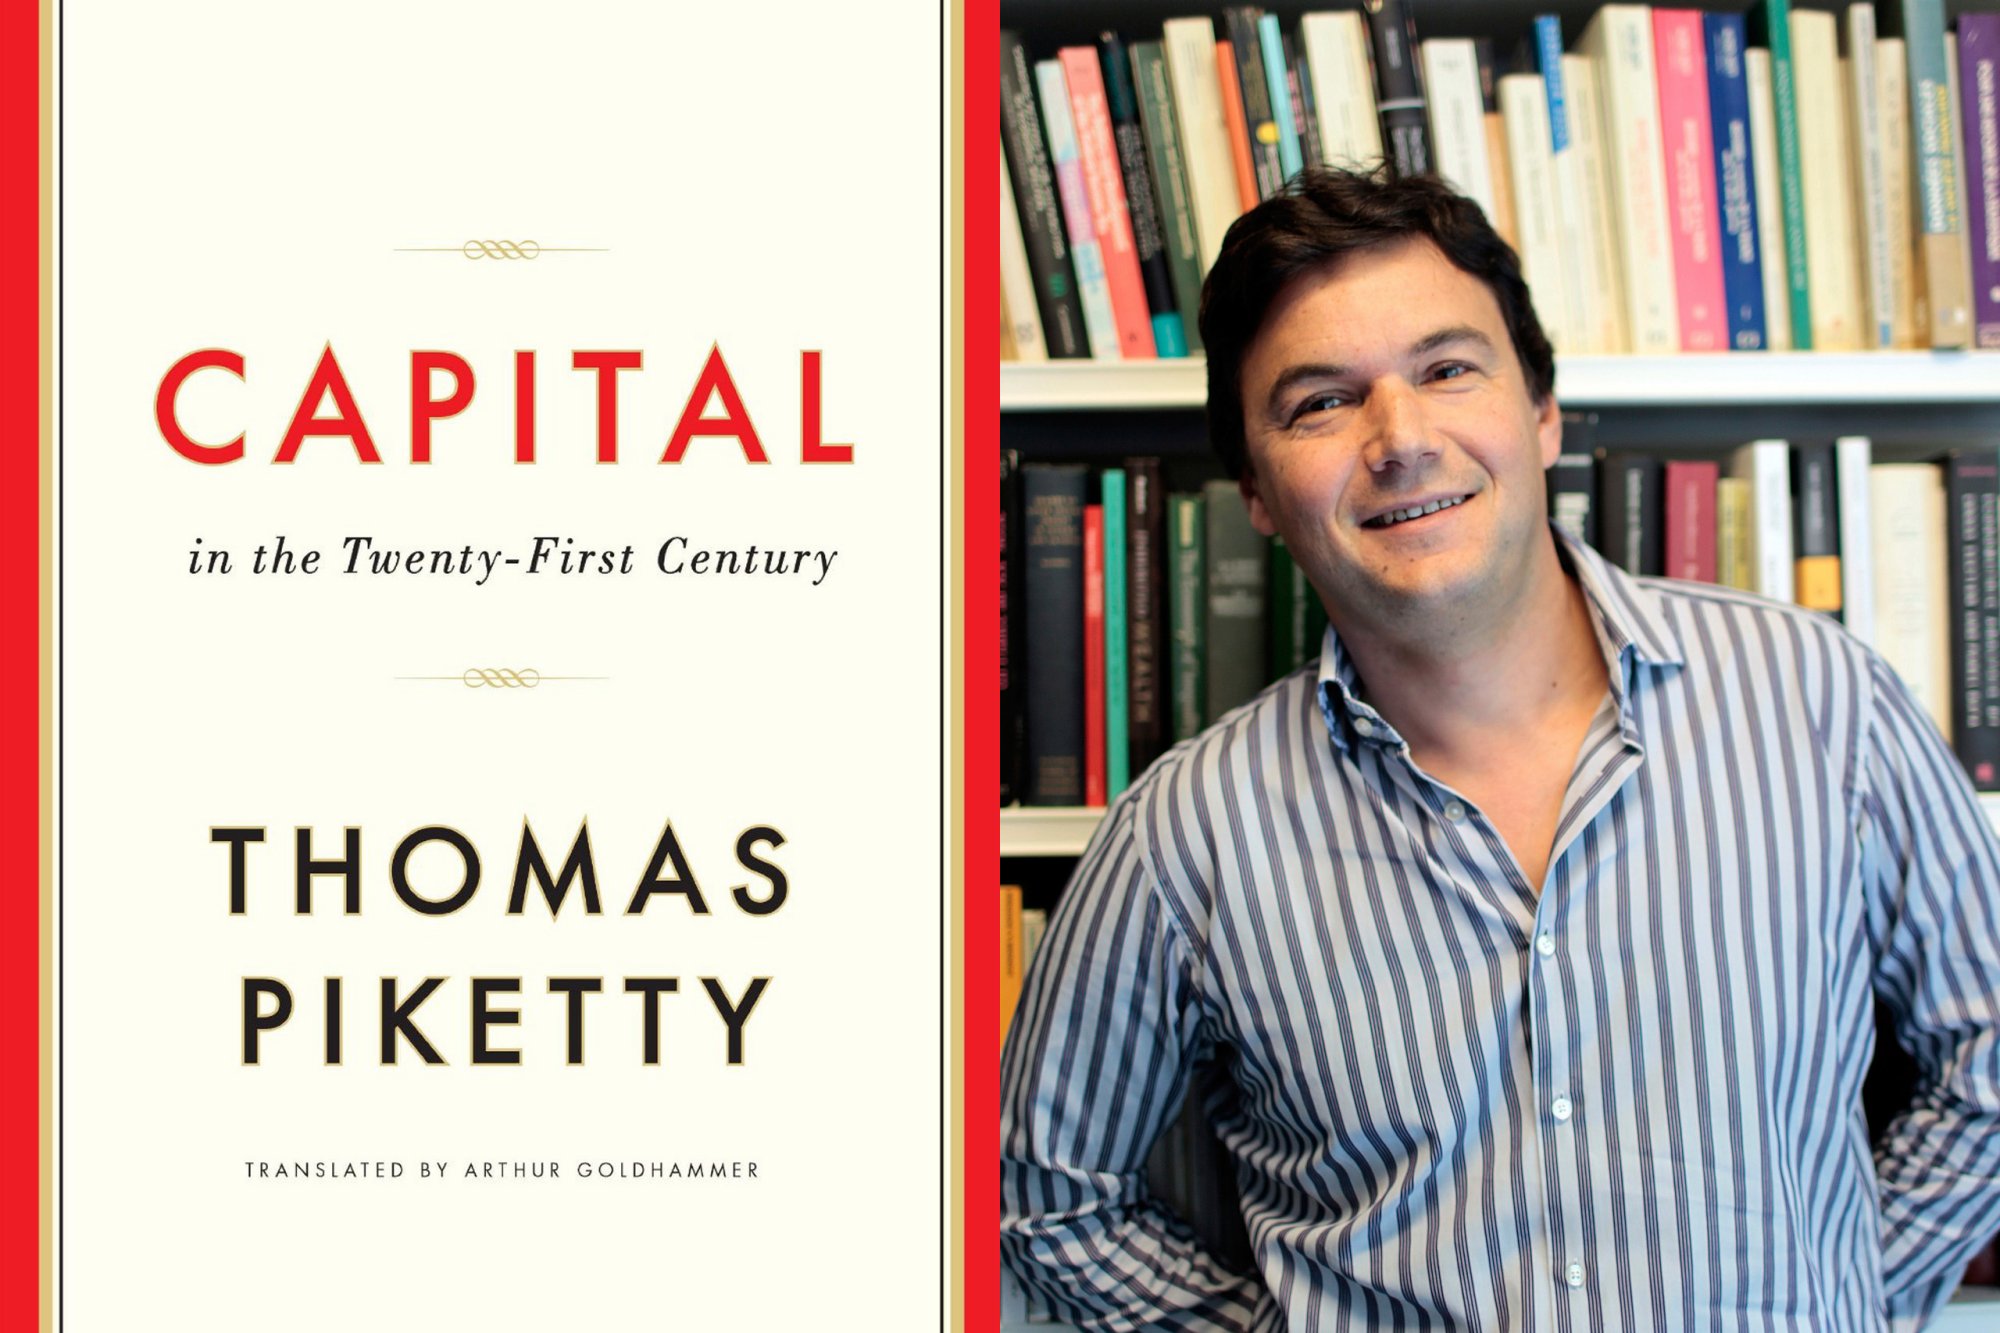 Piketty: Capital in the Twenty-First Century [Review]